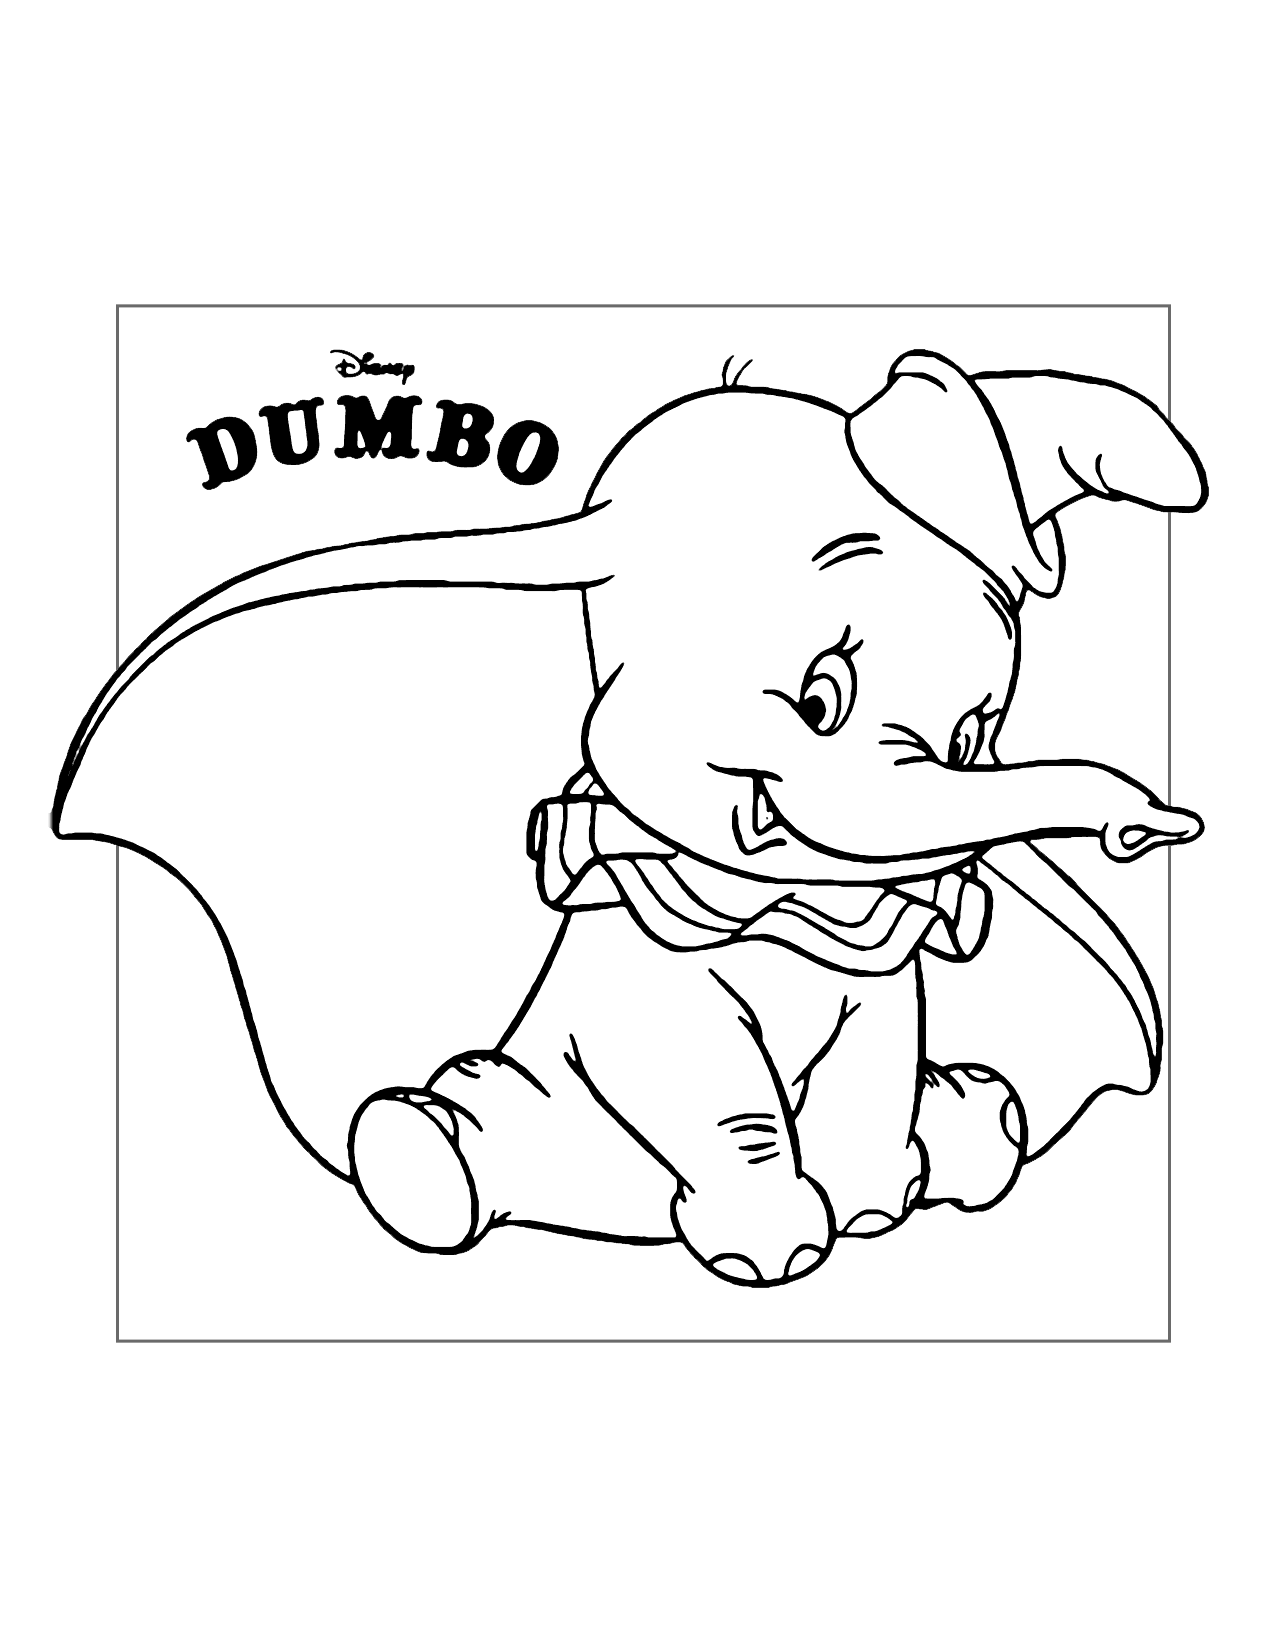 Cute Dumbo Coloring Page